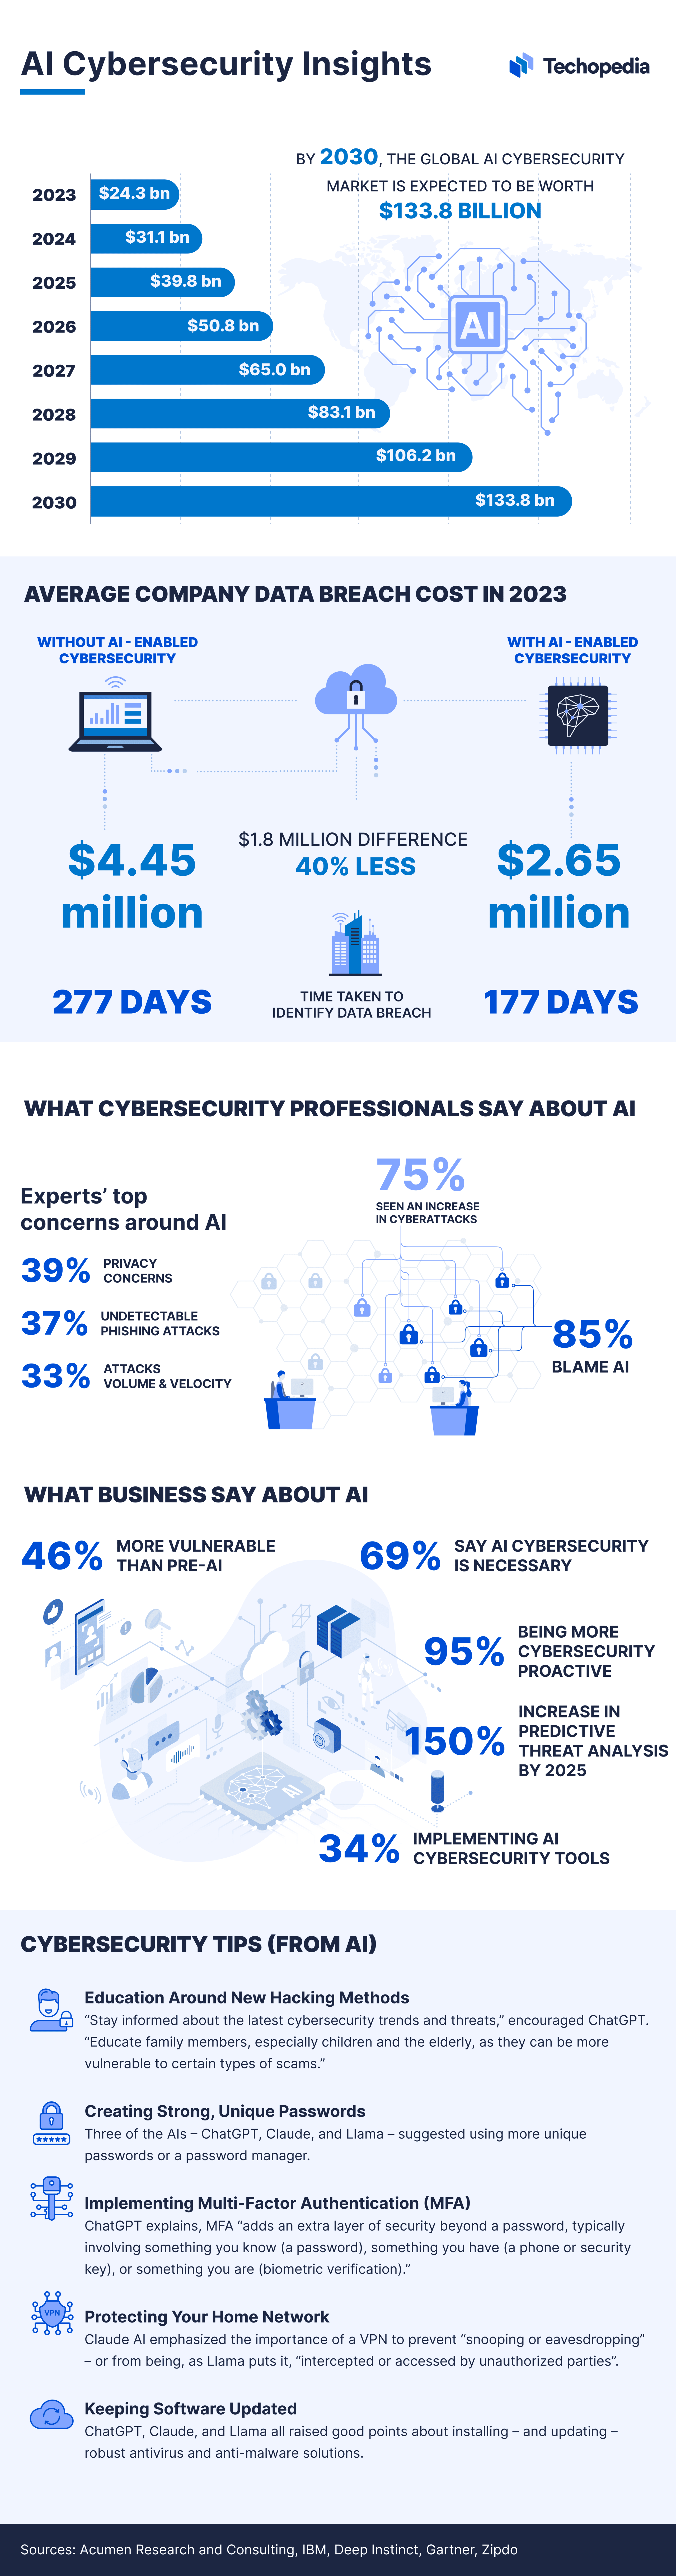 Infographic showing key insights into cybersecurity by AI tools 